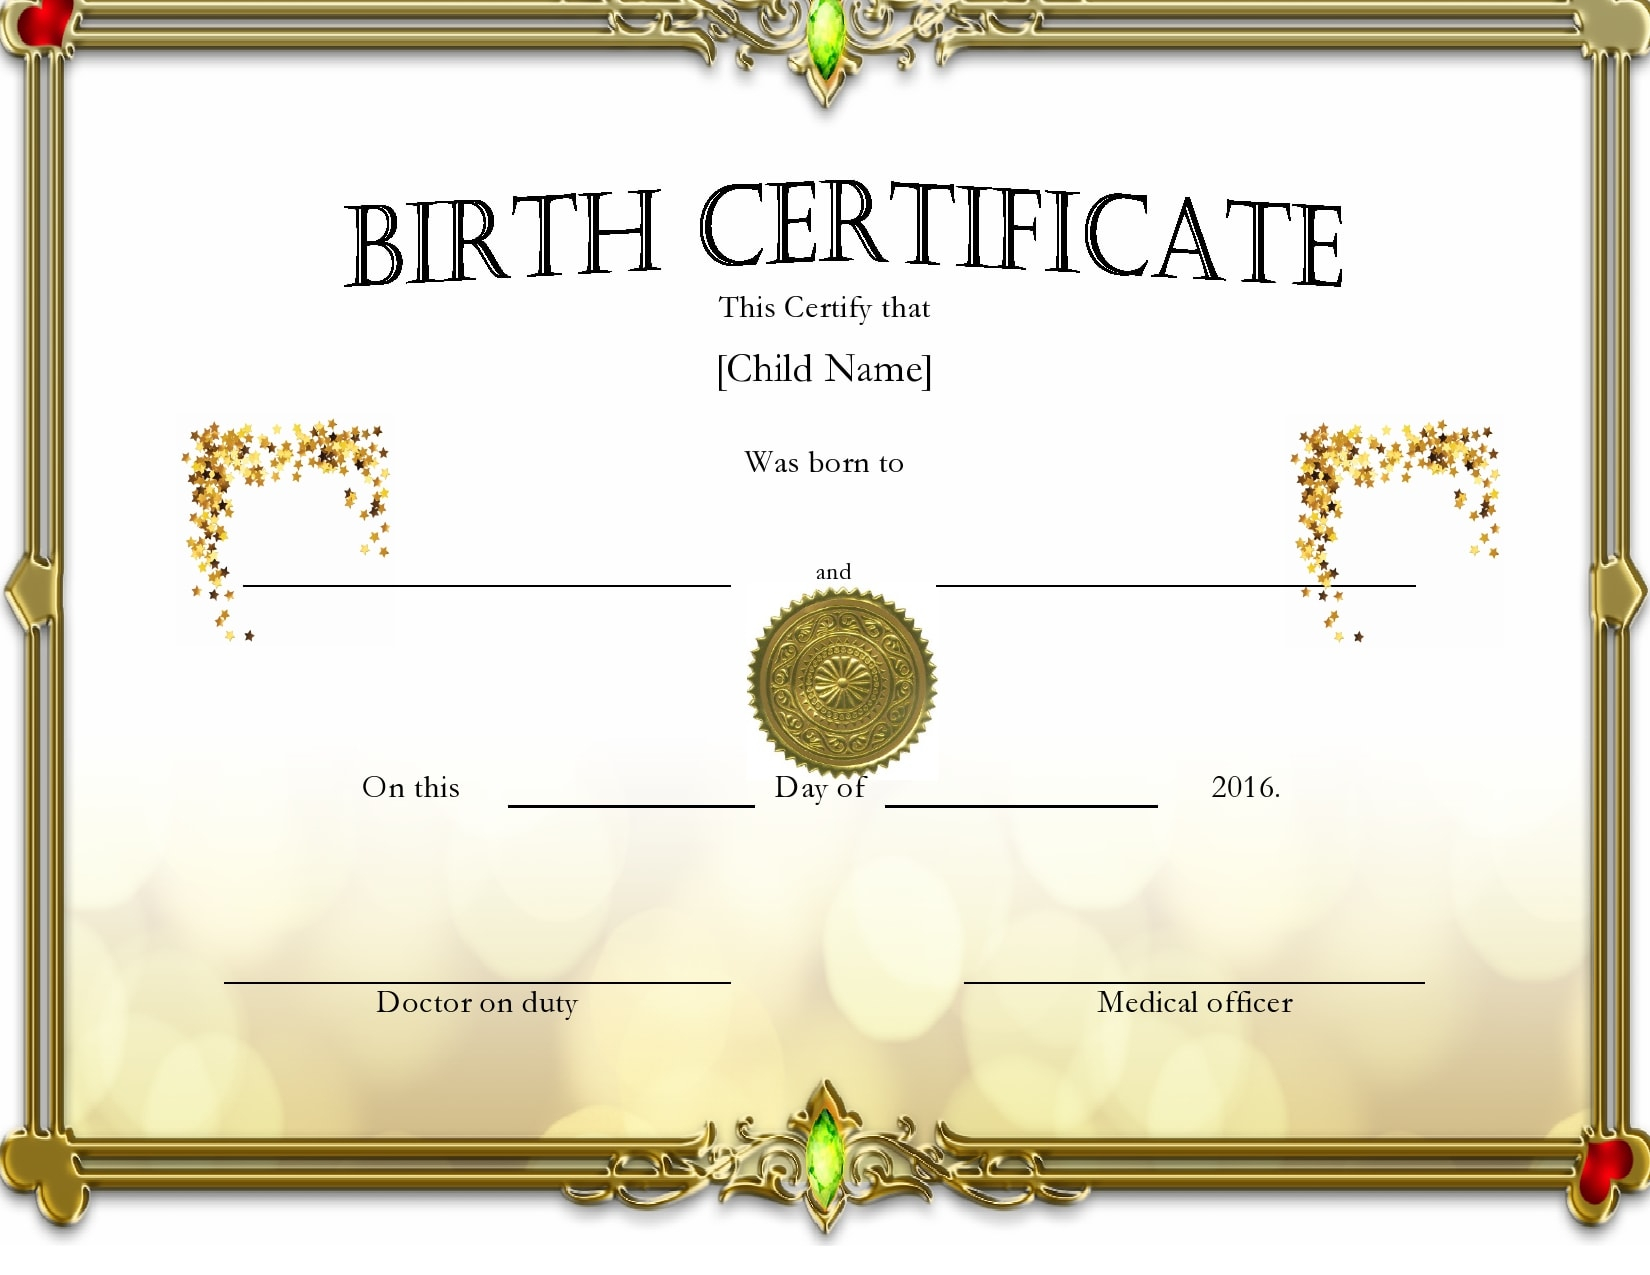 10 Blank Birth Certificate Templates (& Examples) - PrintableTemplates Pertaining To South African Birth Certificate Template